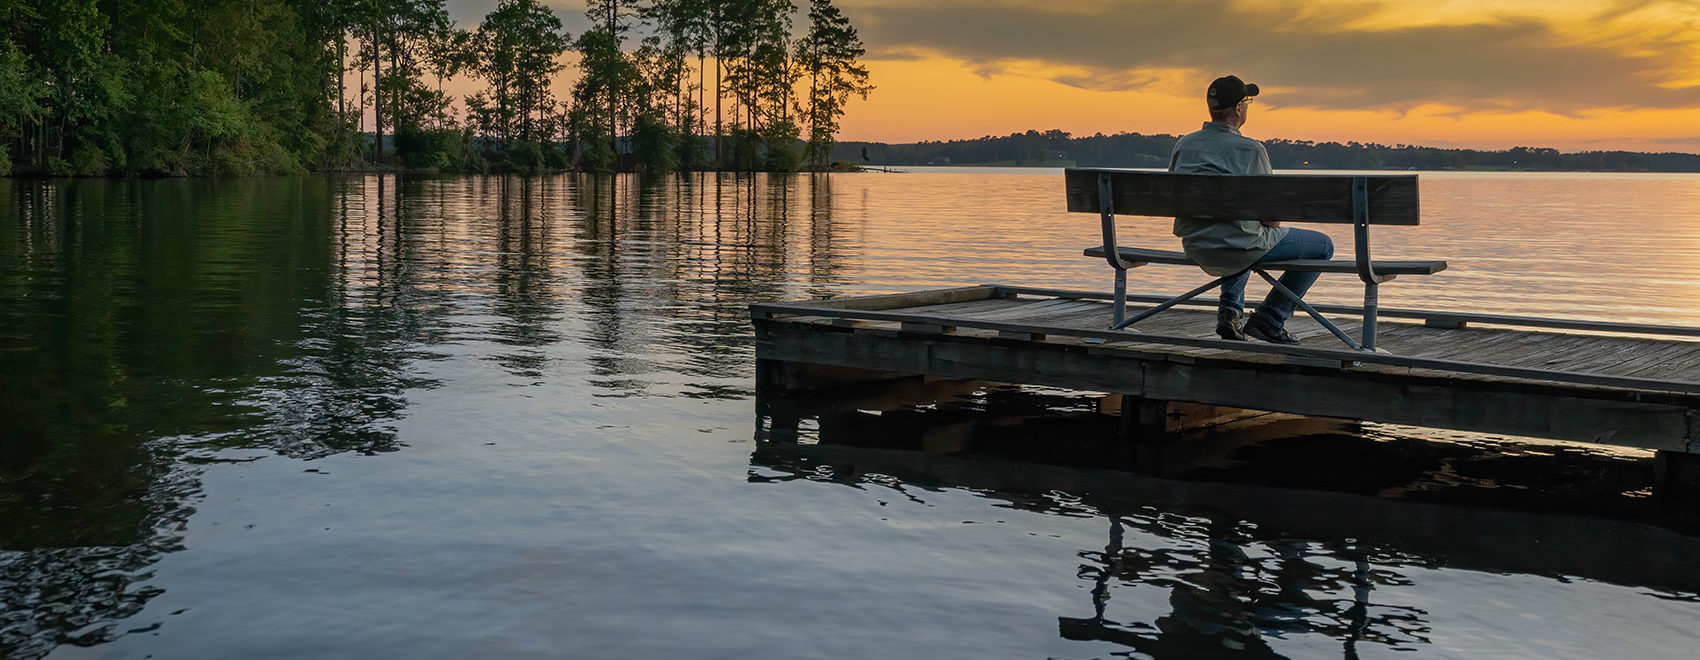 man sitting on dock in peaceful setting on Caney Lake at sunset